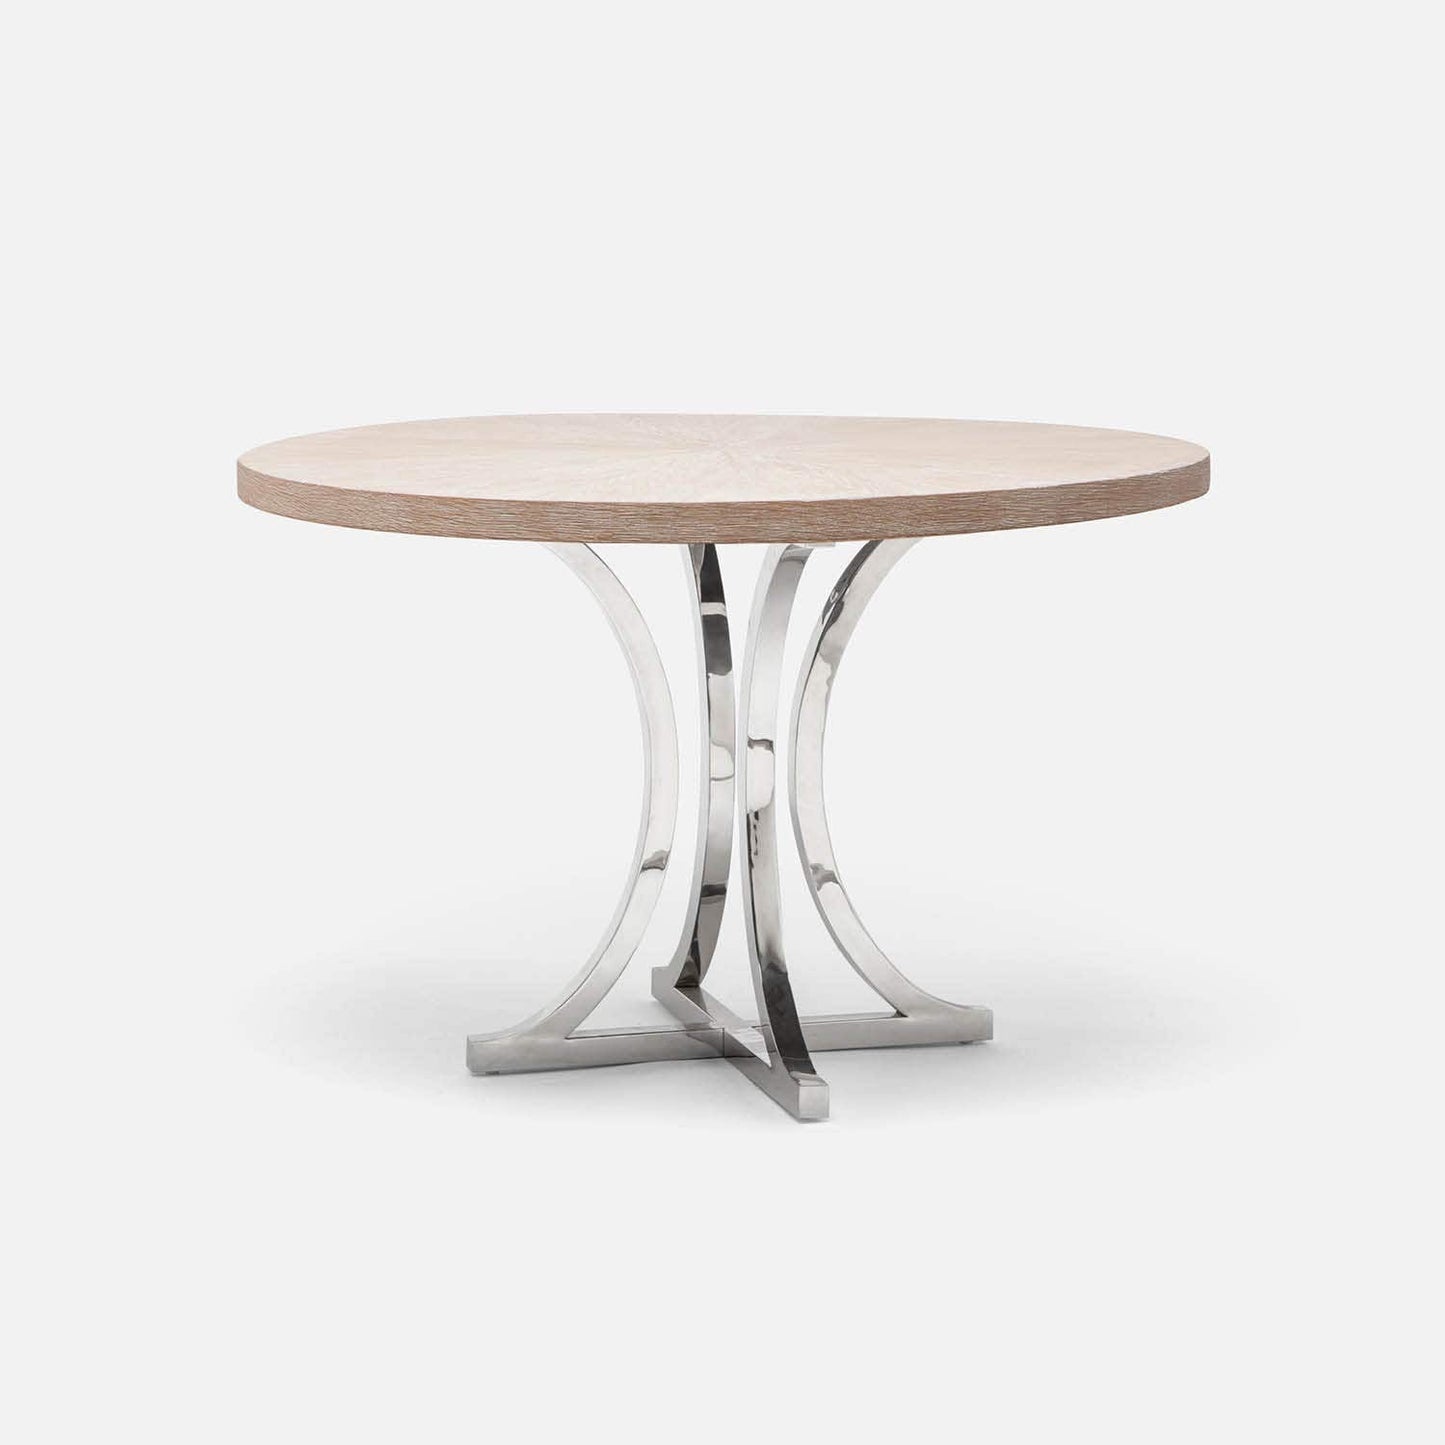 Made Goods Leighton 72" x 30" Polished Silver Steel Dinning Table With Round White Cerused Oak Table Top